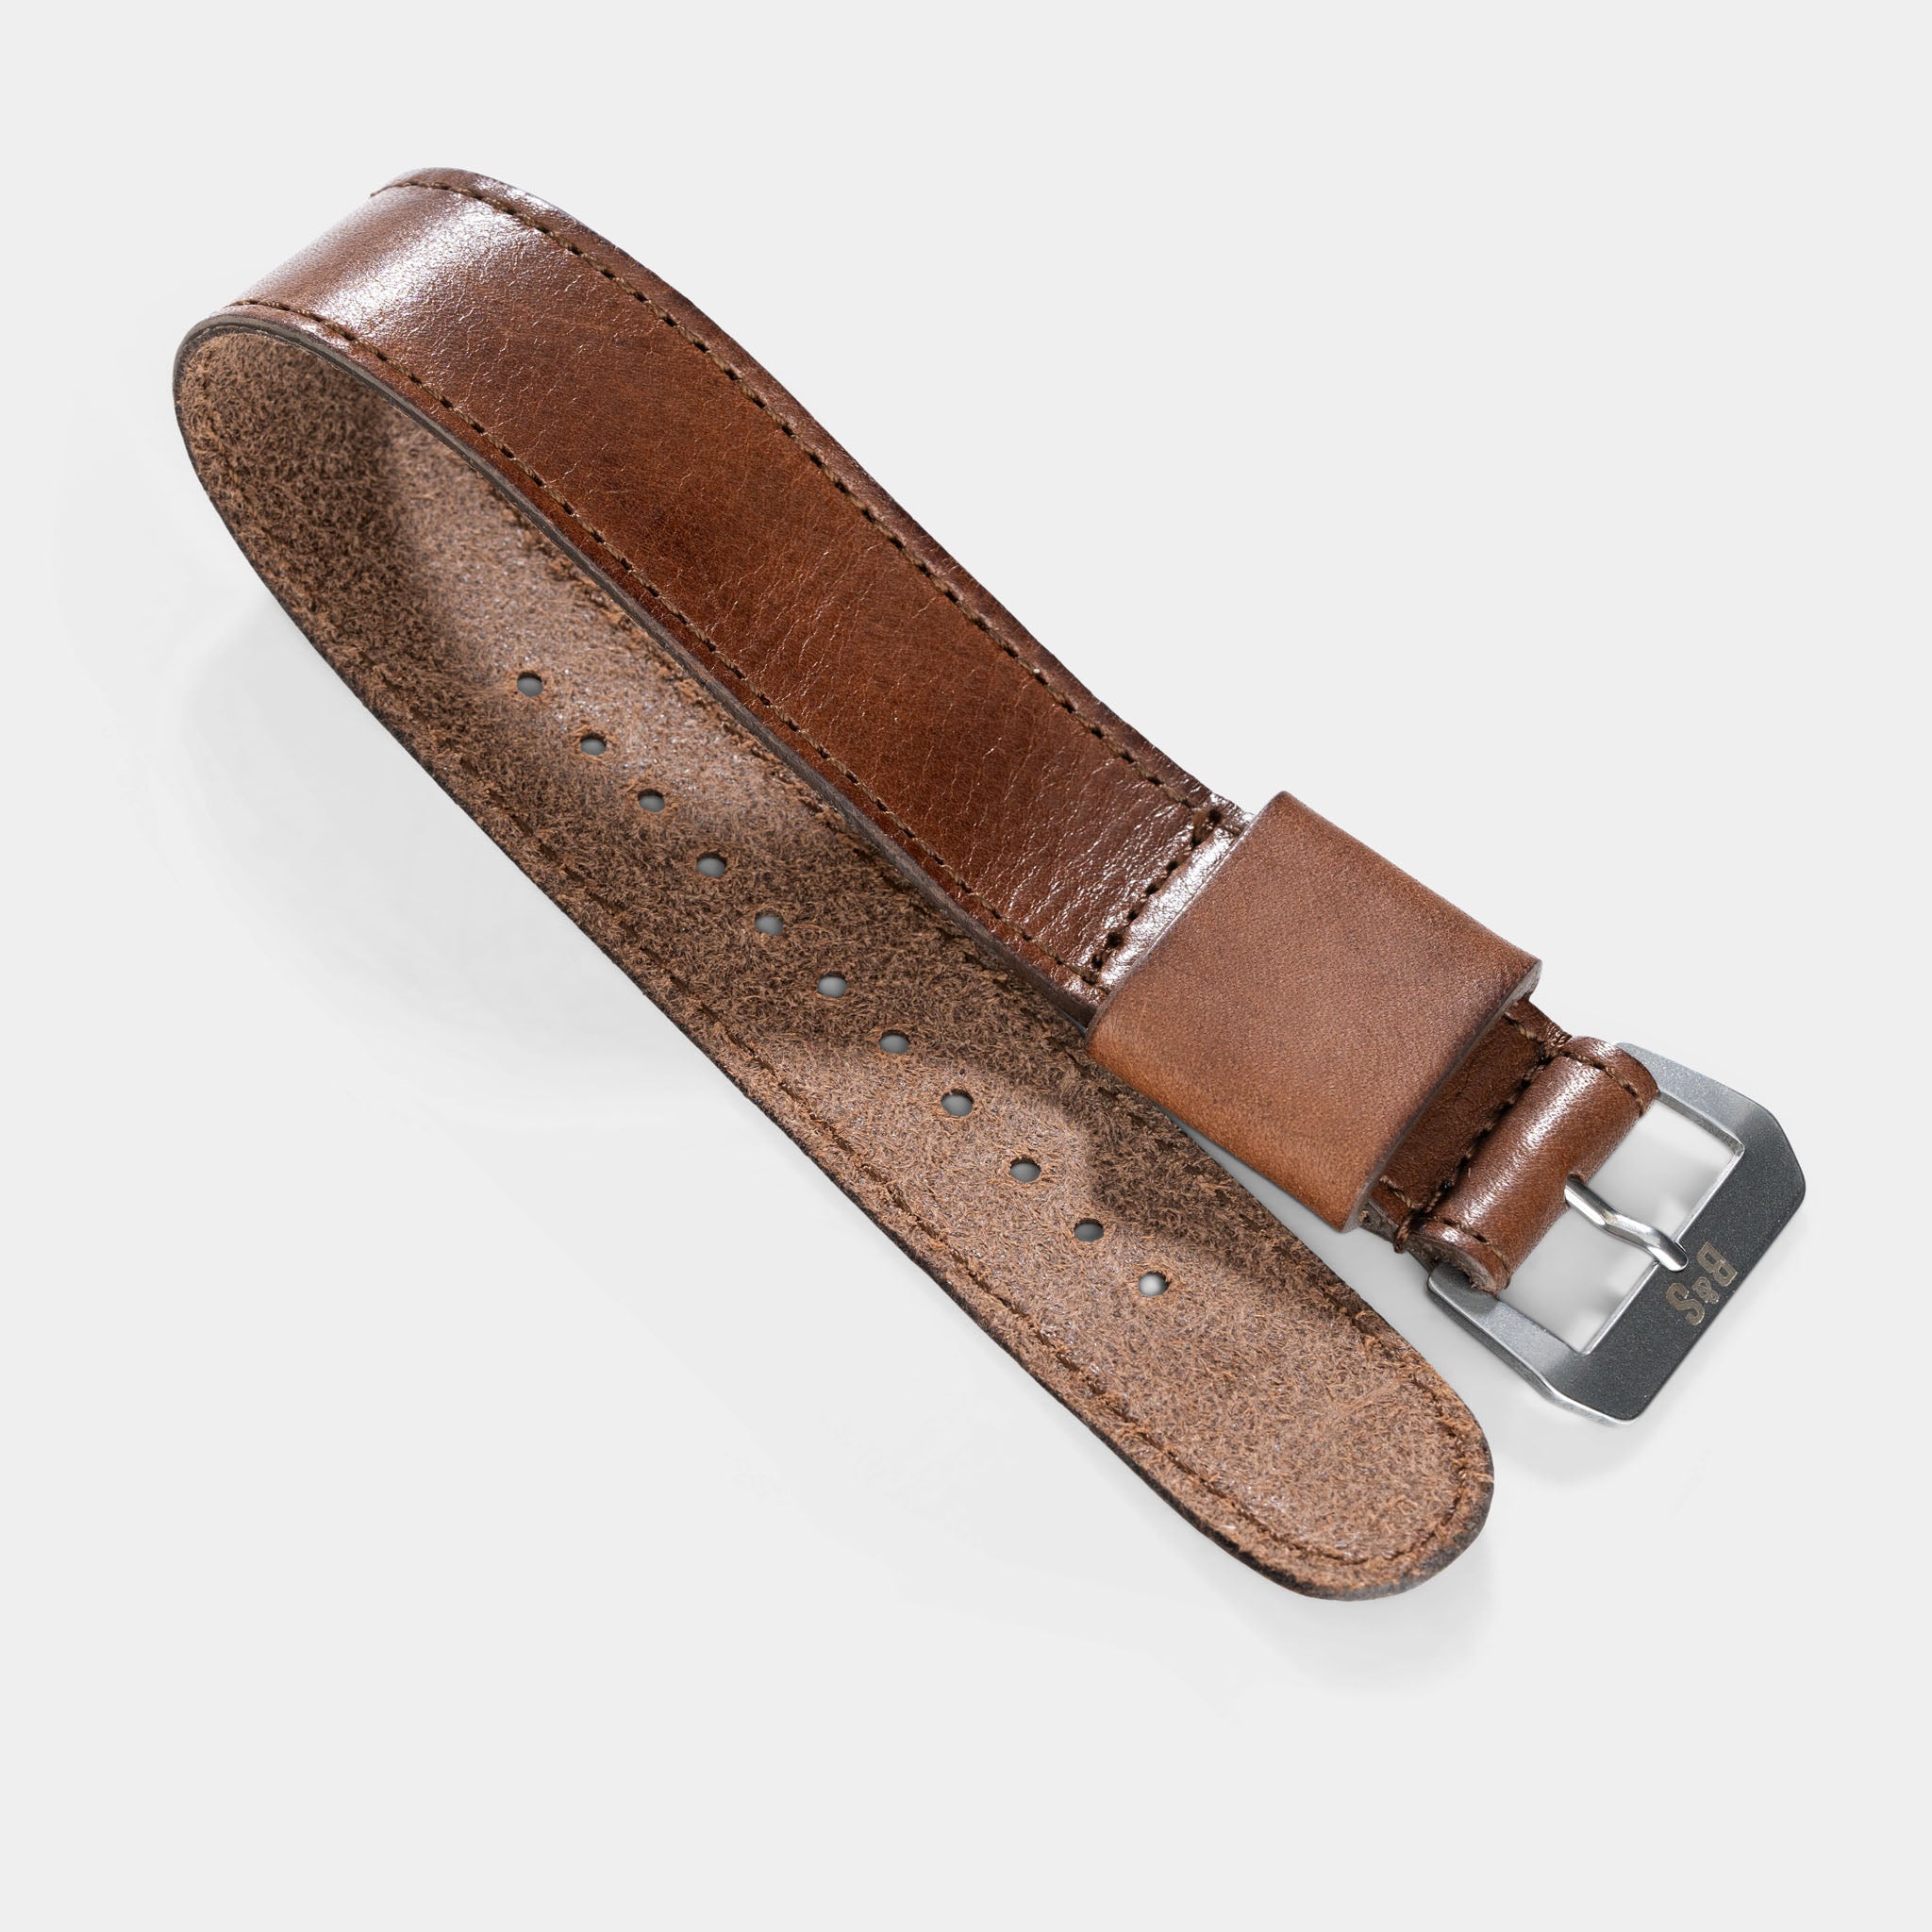 Finest_italian_One_Piece_Nato_Style_Brown_Leather_Watch_Strap